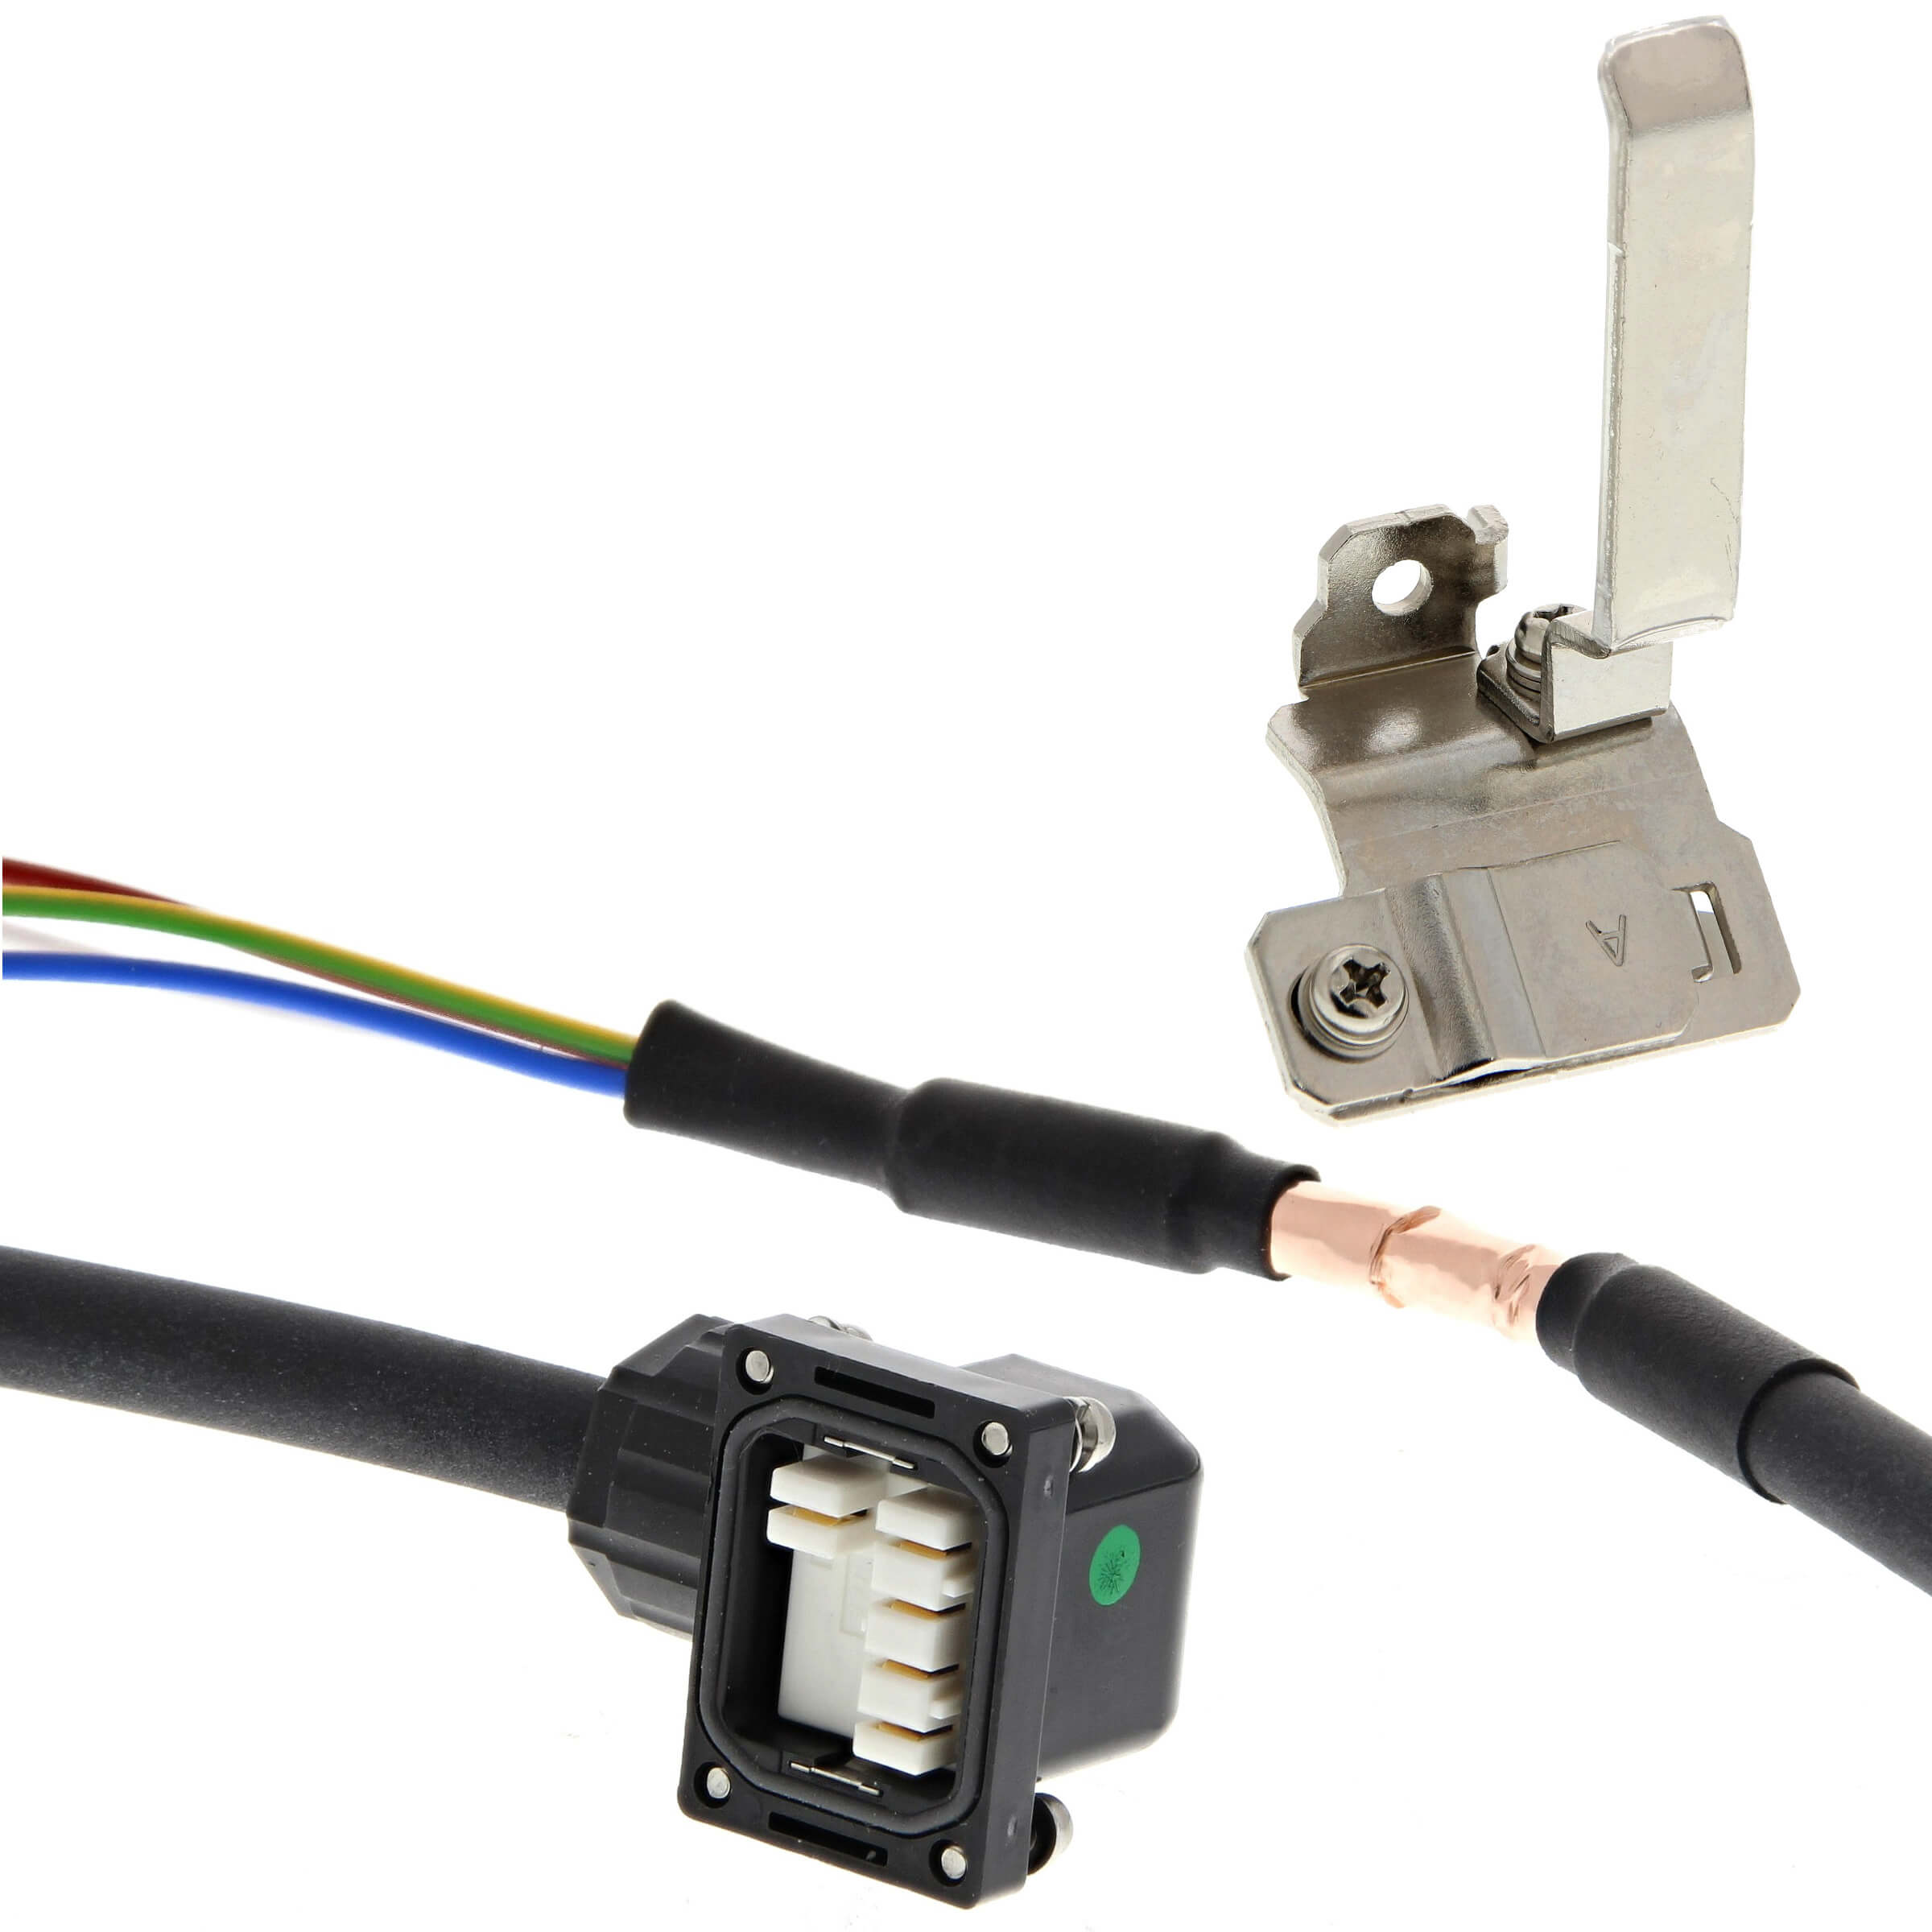 1S Servo Motor, Power Cables